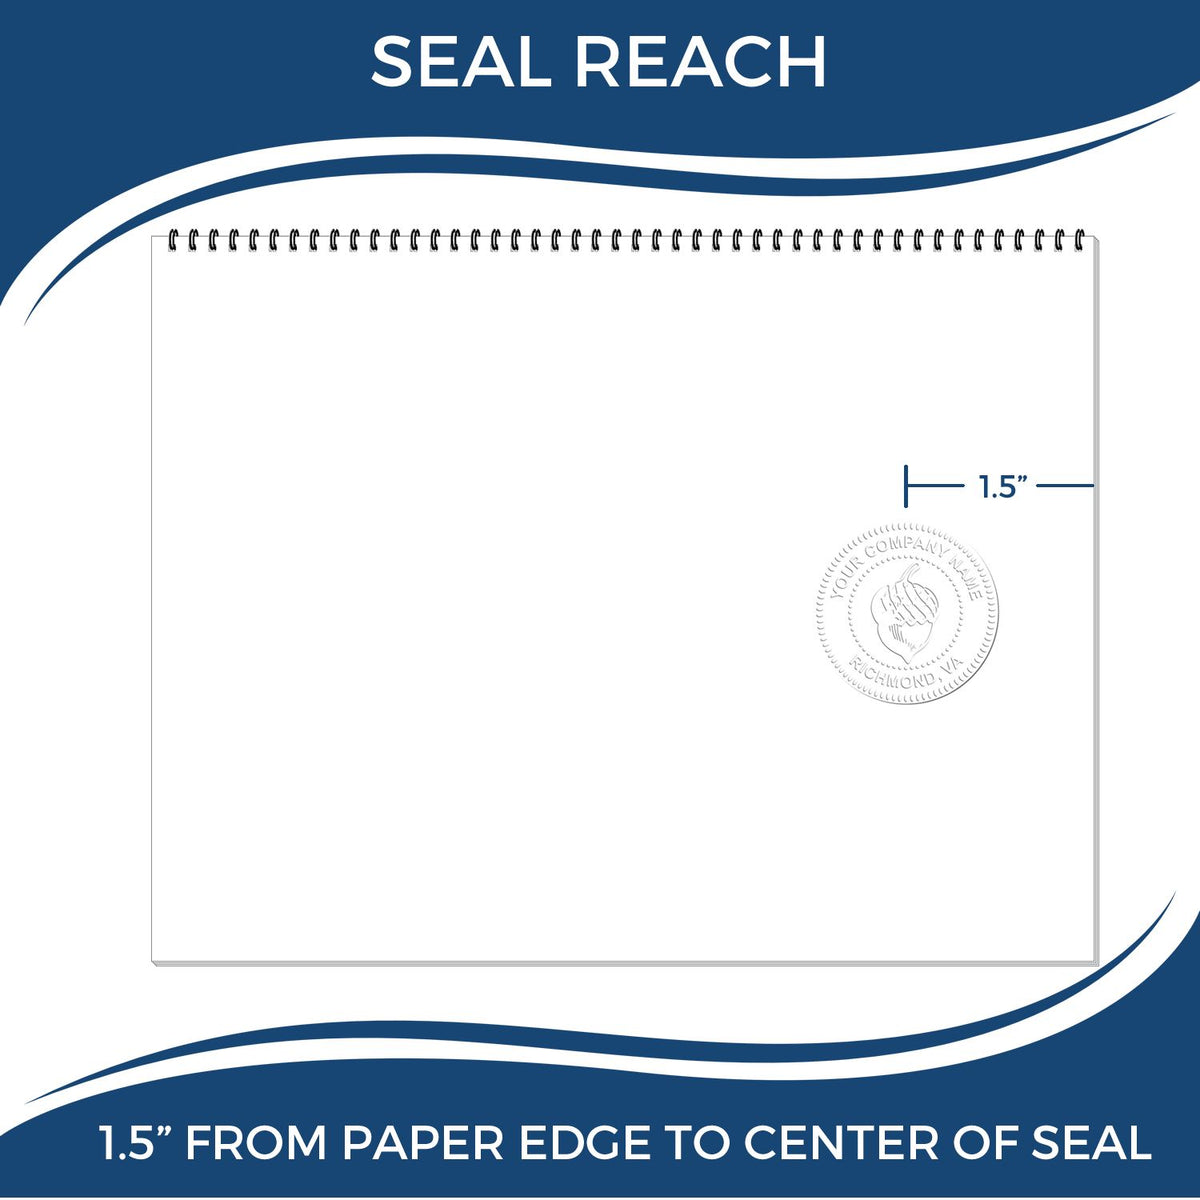 An infographic showing the seal reach which is represented by a ruler and a miniature seal image of the Soft Pocket Minnesota Landscape Architect Embosser